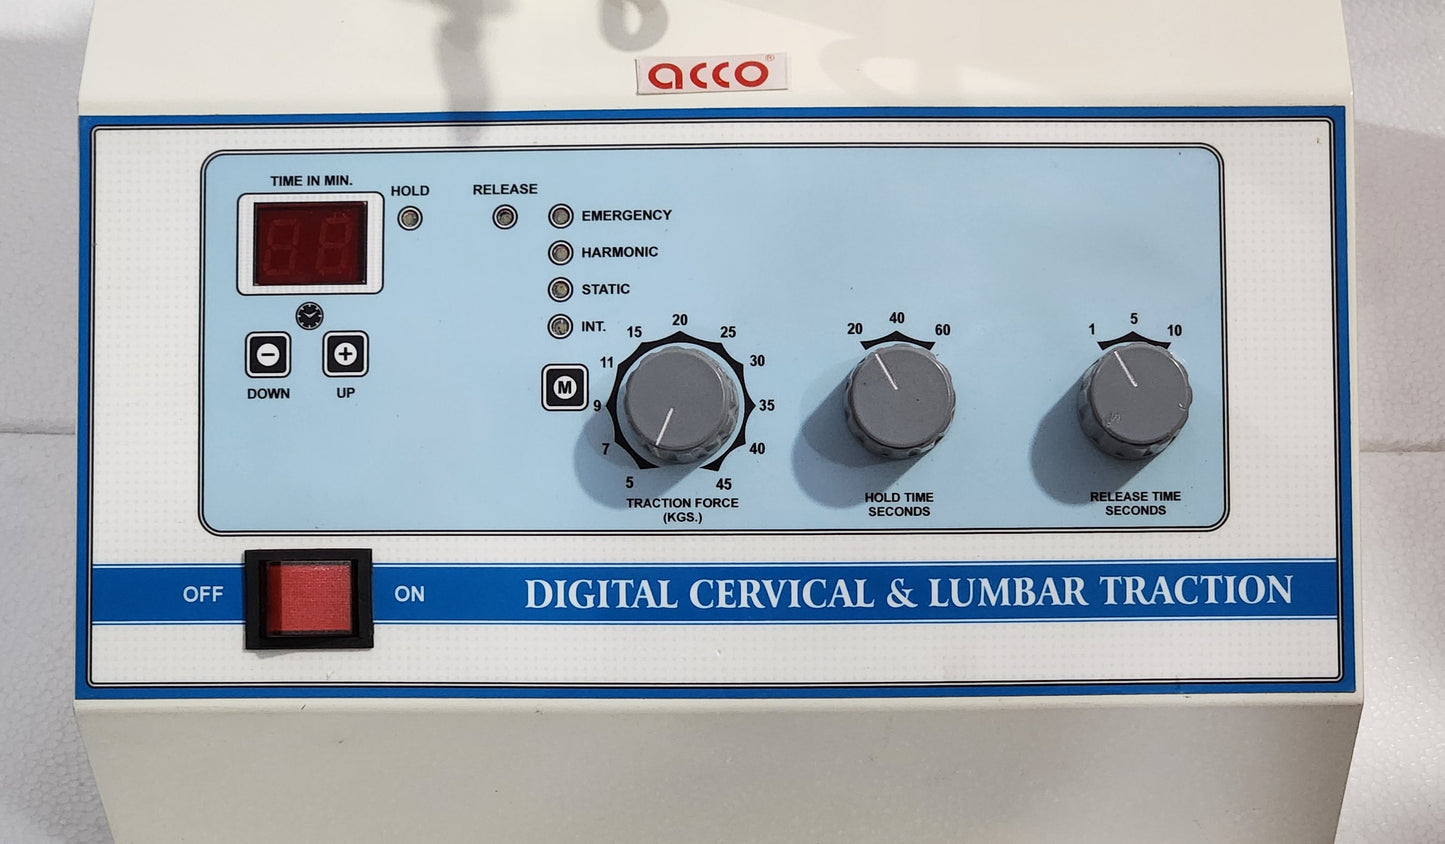 acco Cervical & Lumber Traction Unit (Digital)